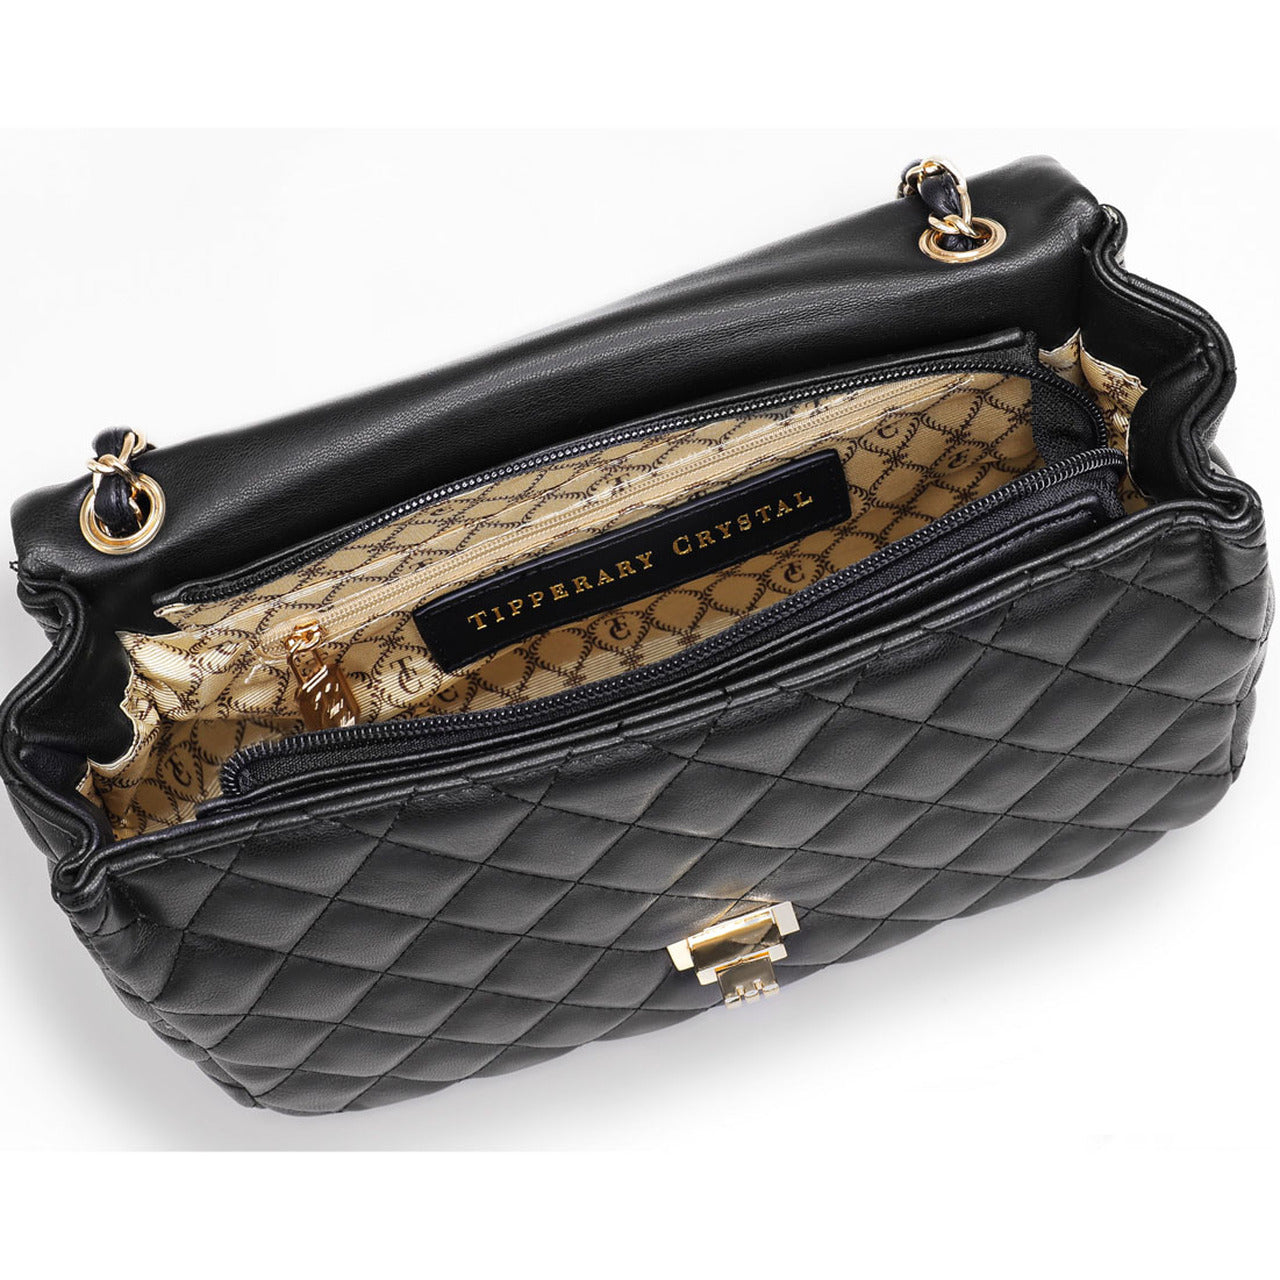 Tipperary Crystal Quilted Shoulder Bag Palermo Black  Palermo Black Quilted Shoulder Bag featuring yellow gold hardware.